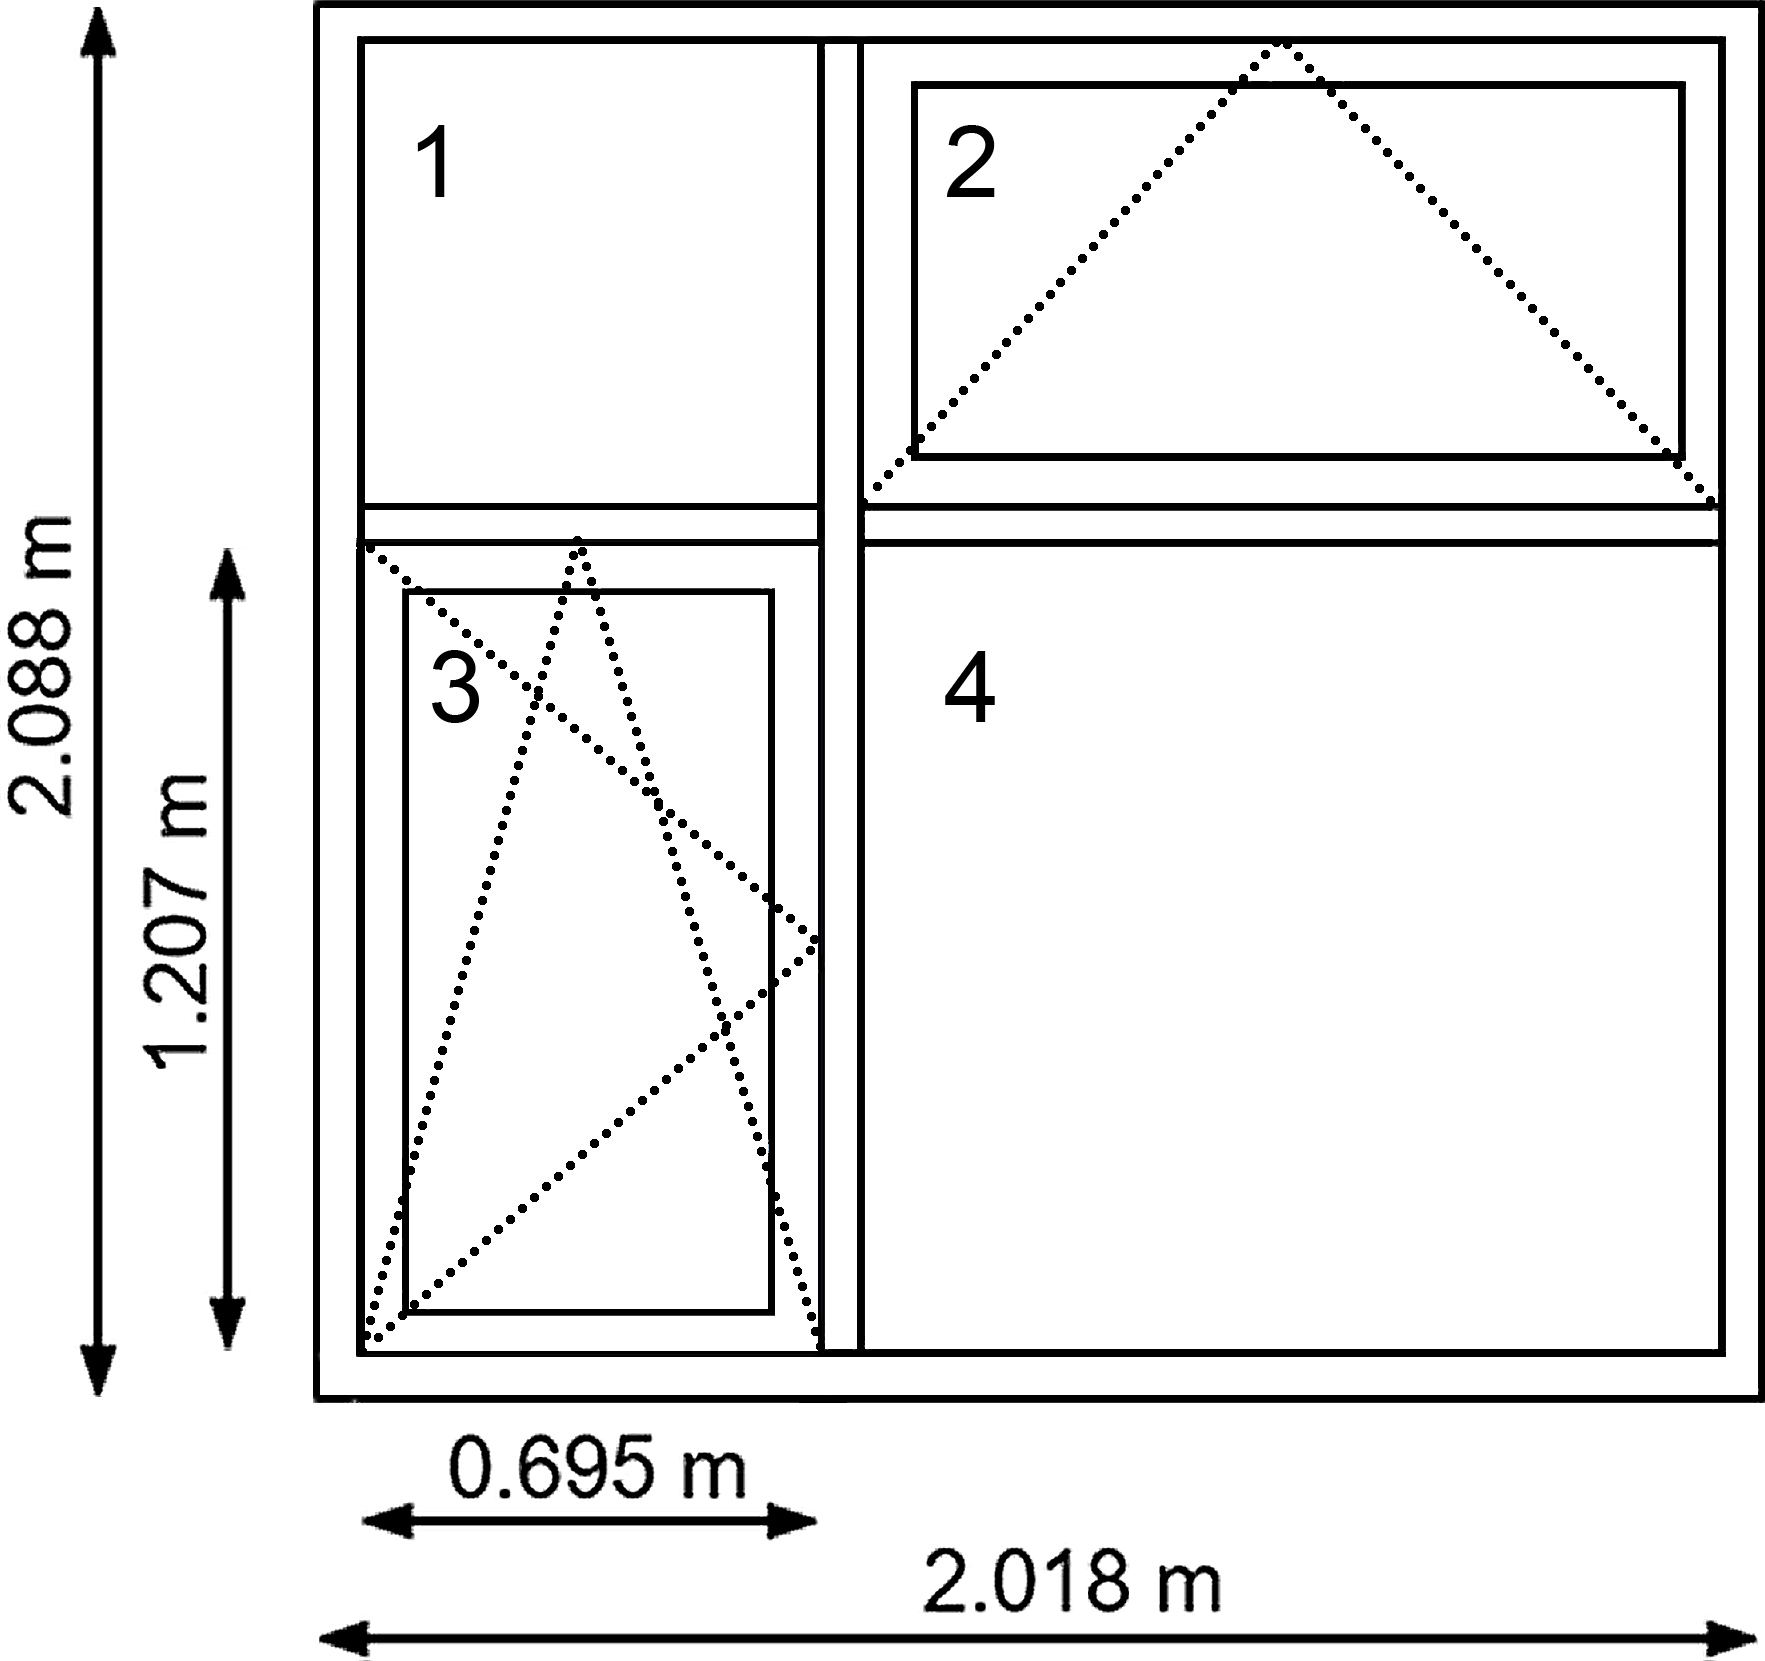 Dimensions and layout of the window installed in each cell.